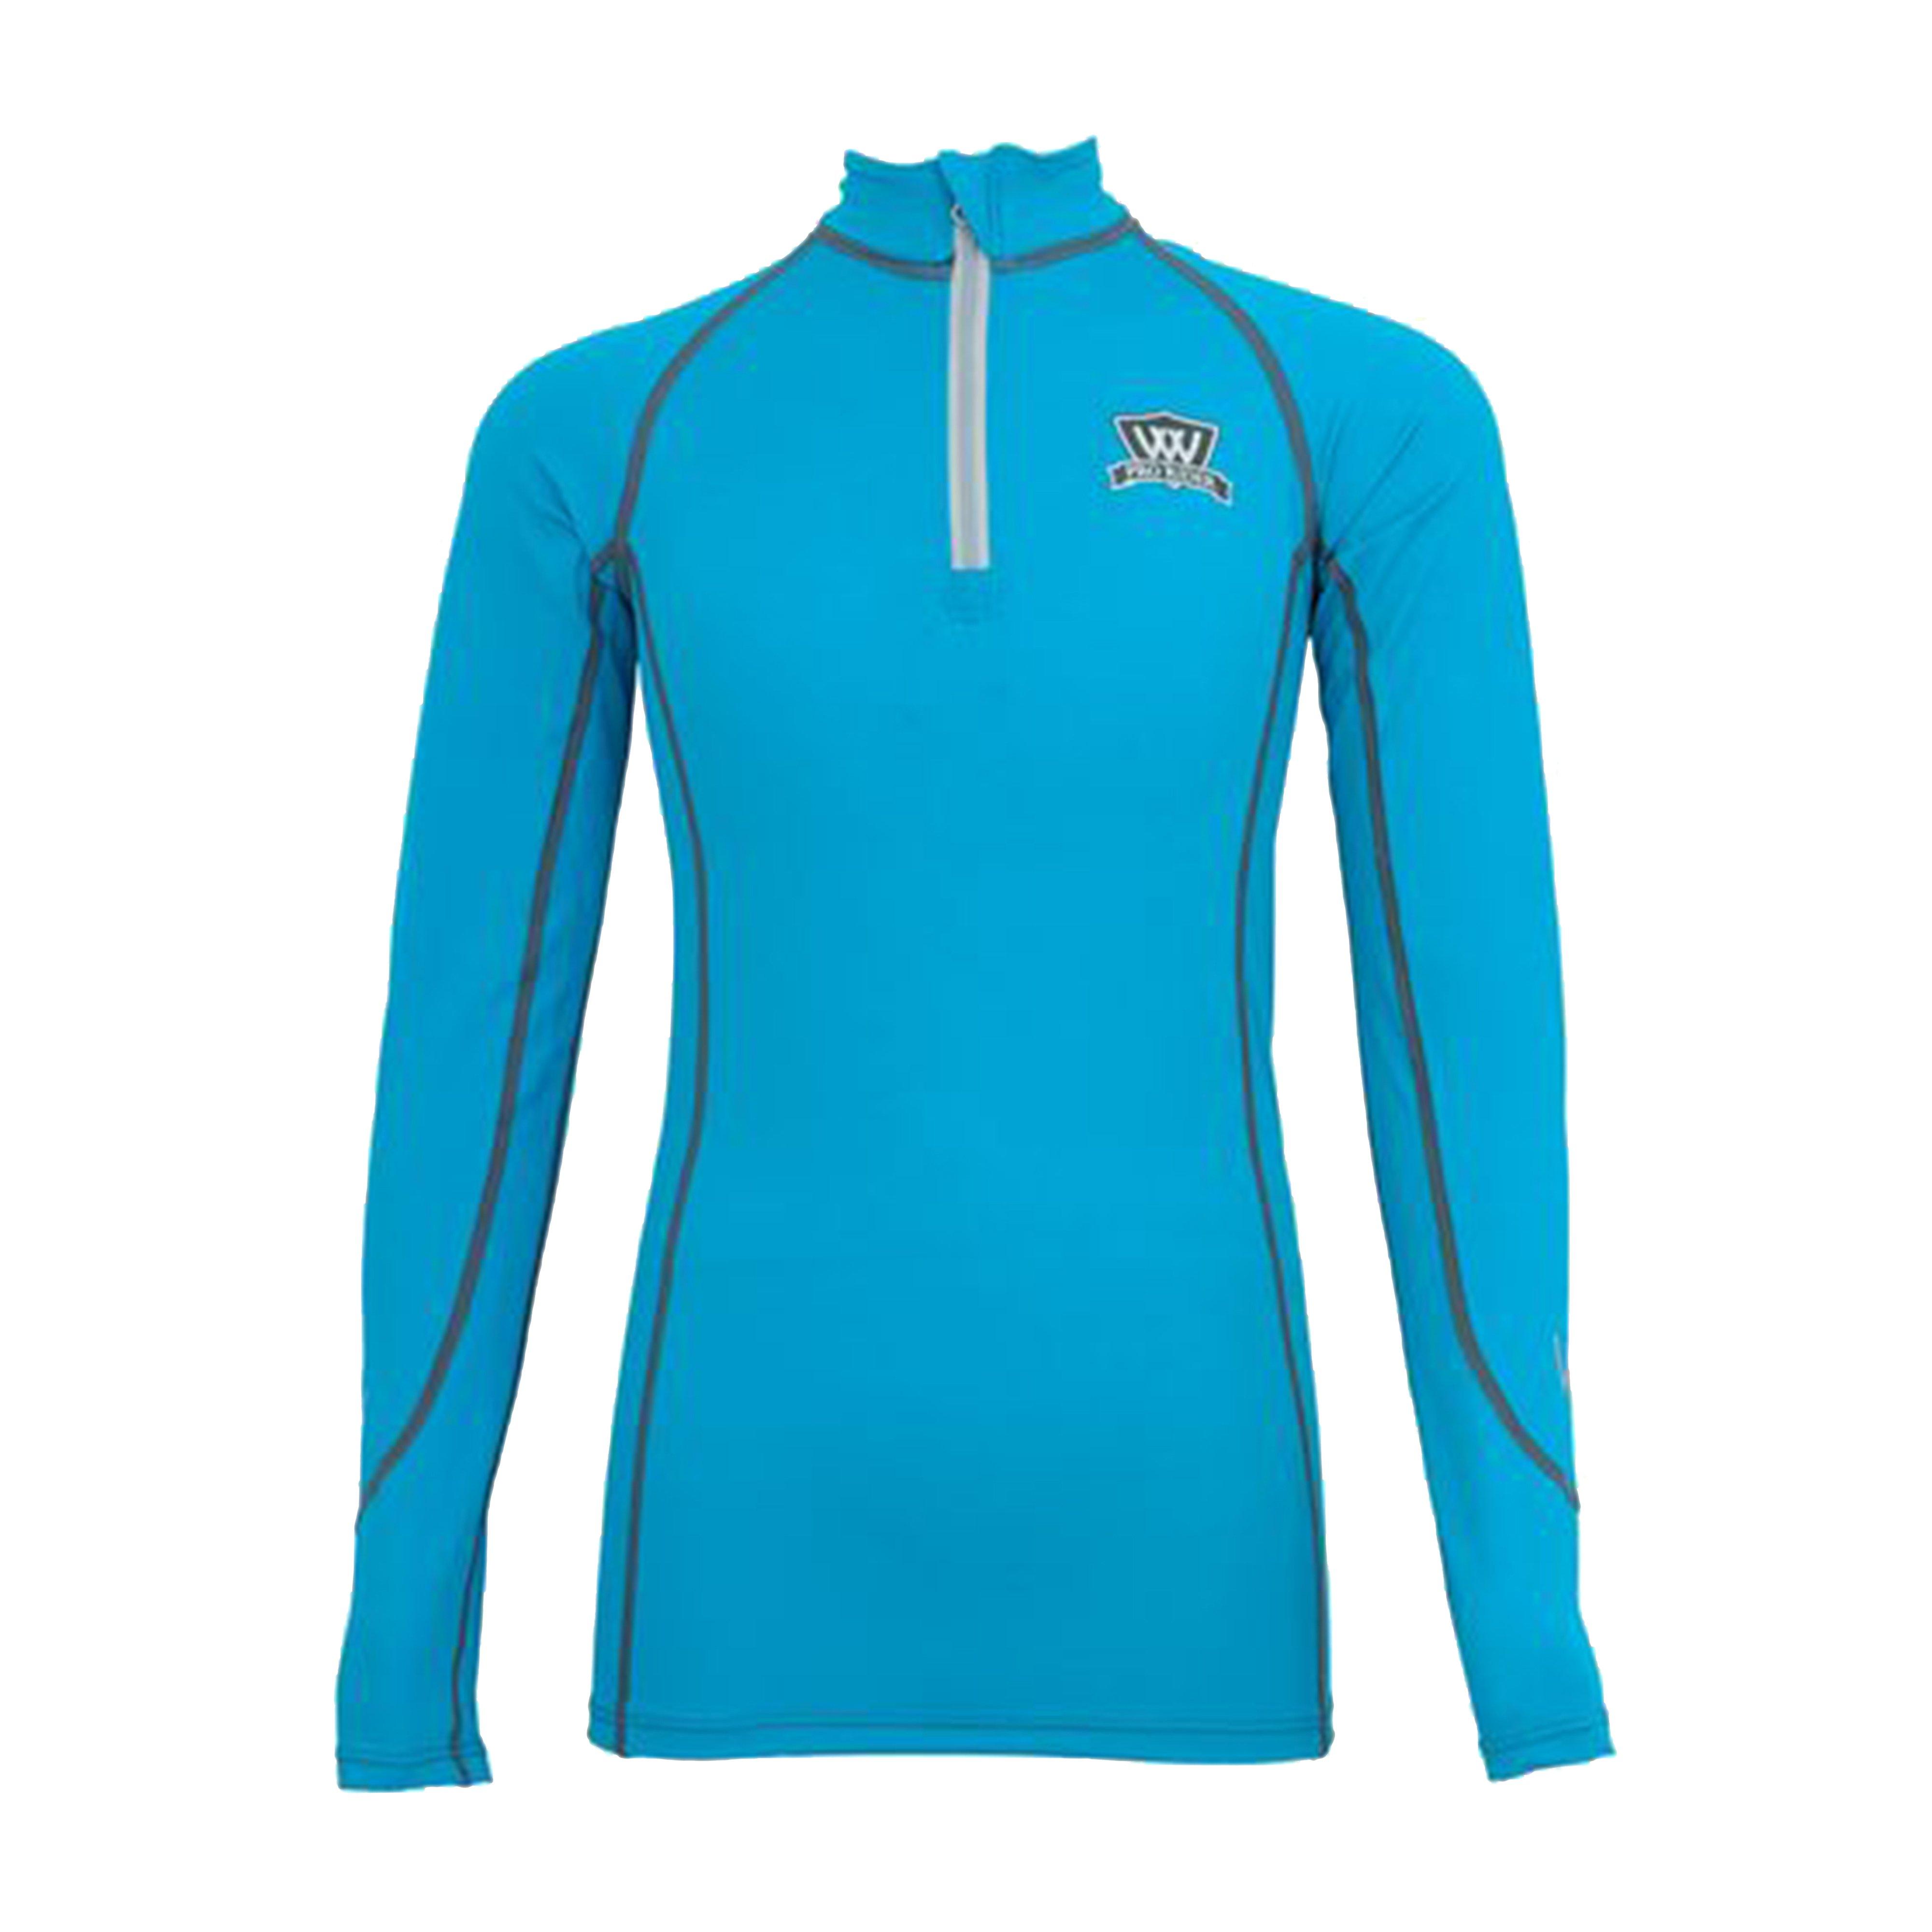 Young Rider Pro Performance Shirt Turquoise